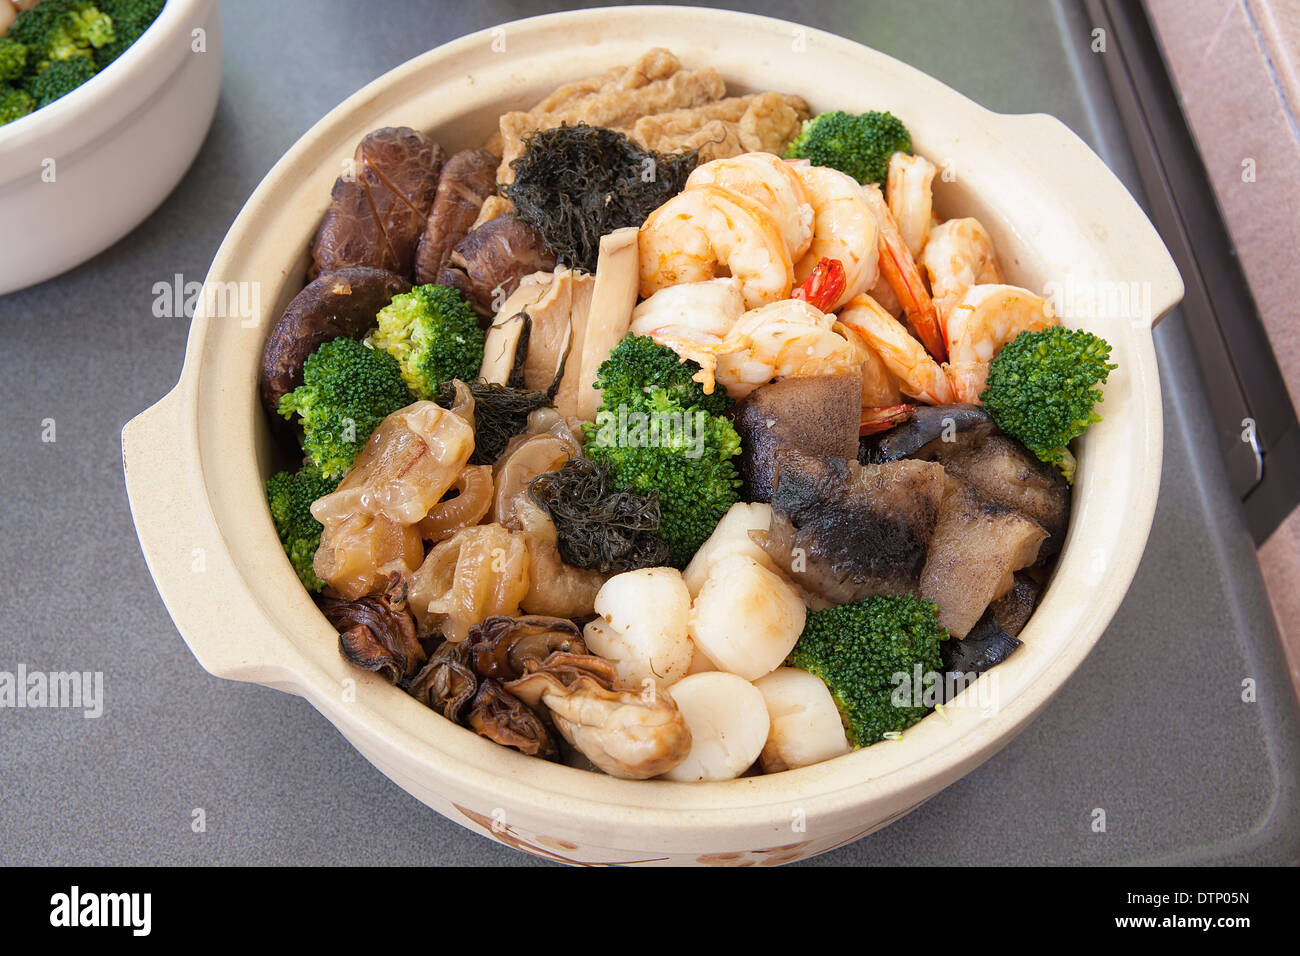 Poon Choi Hong Kong Cantonese Cuisine Big Feast Bowl for Chinese New Year Closeup Stock Photo